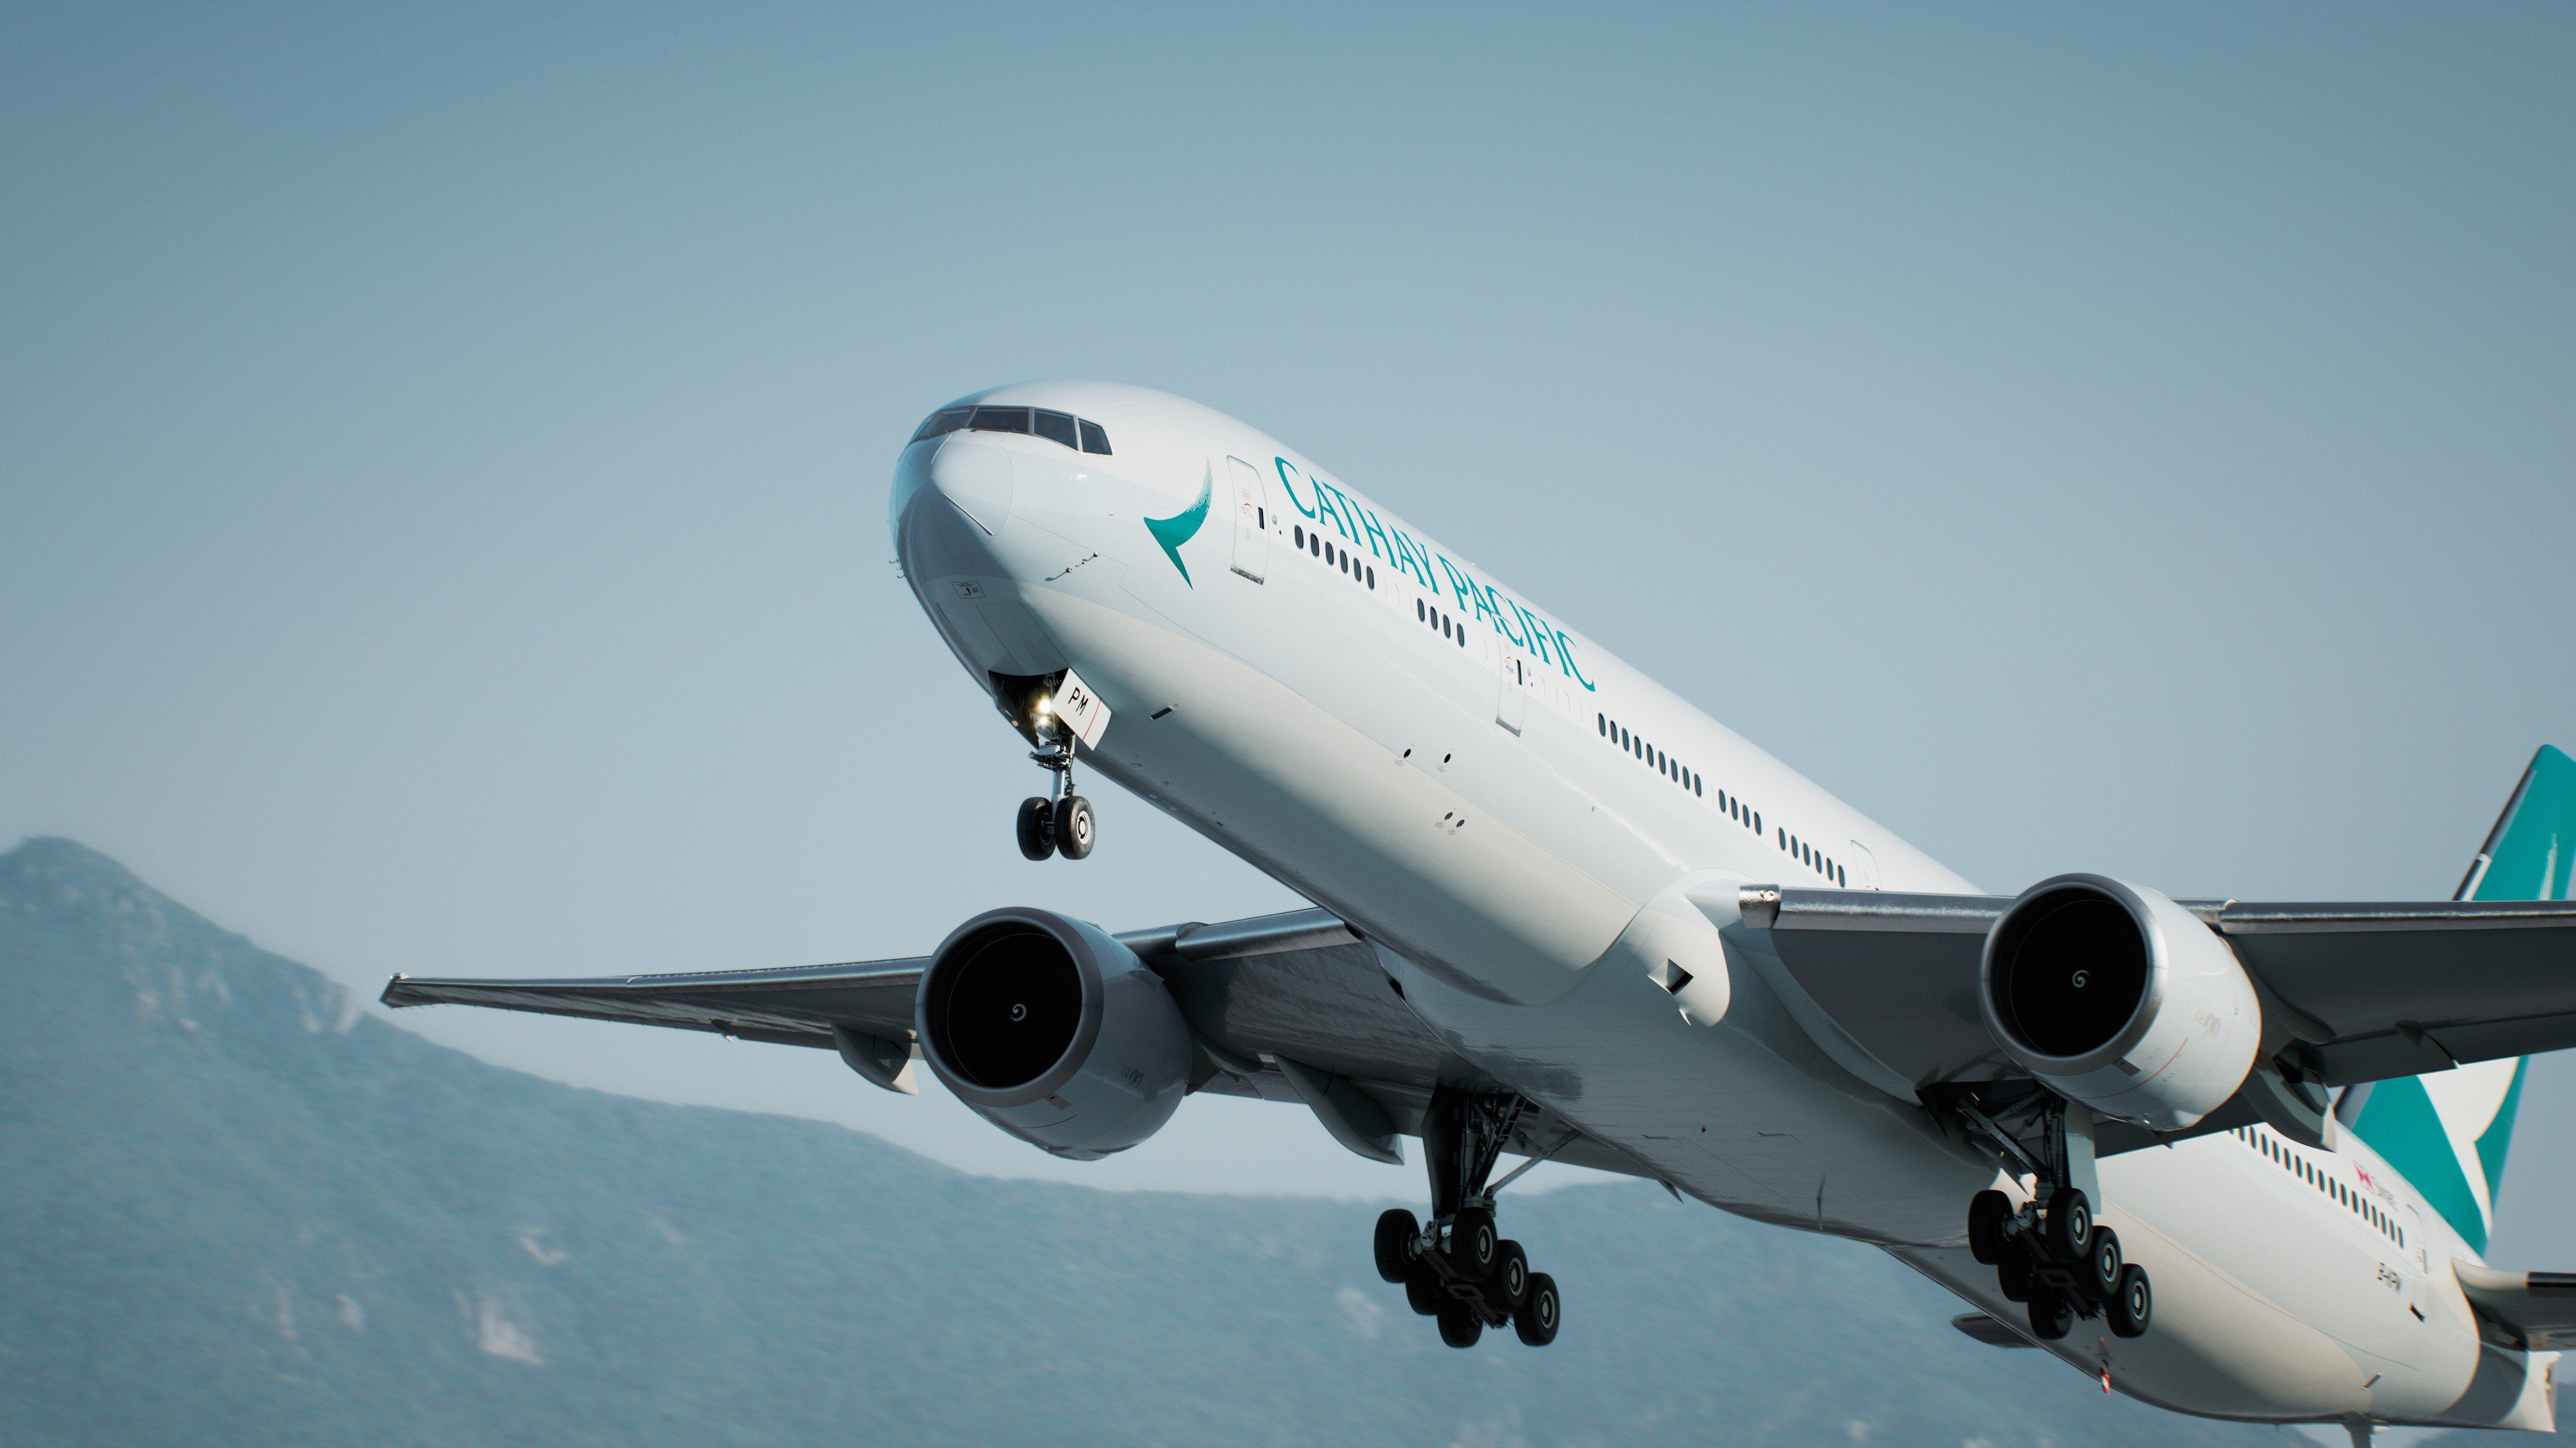 Cathay Pacific Boeing 777 Departure.